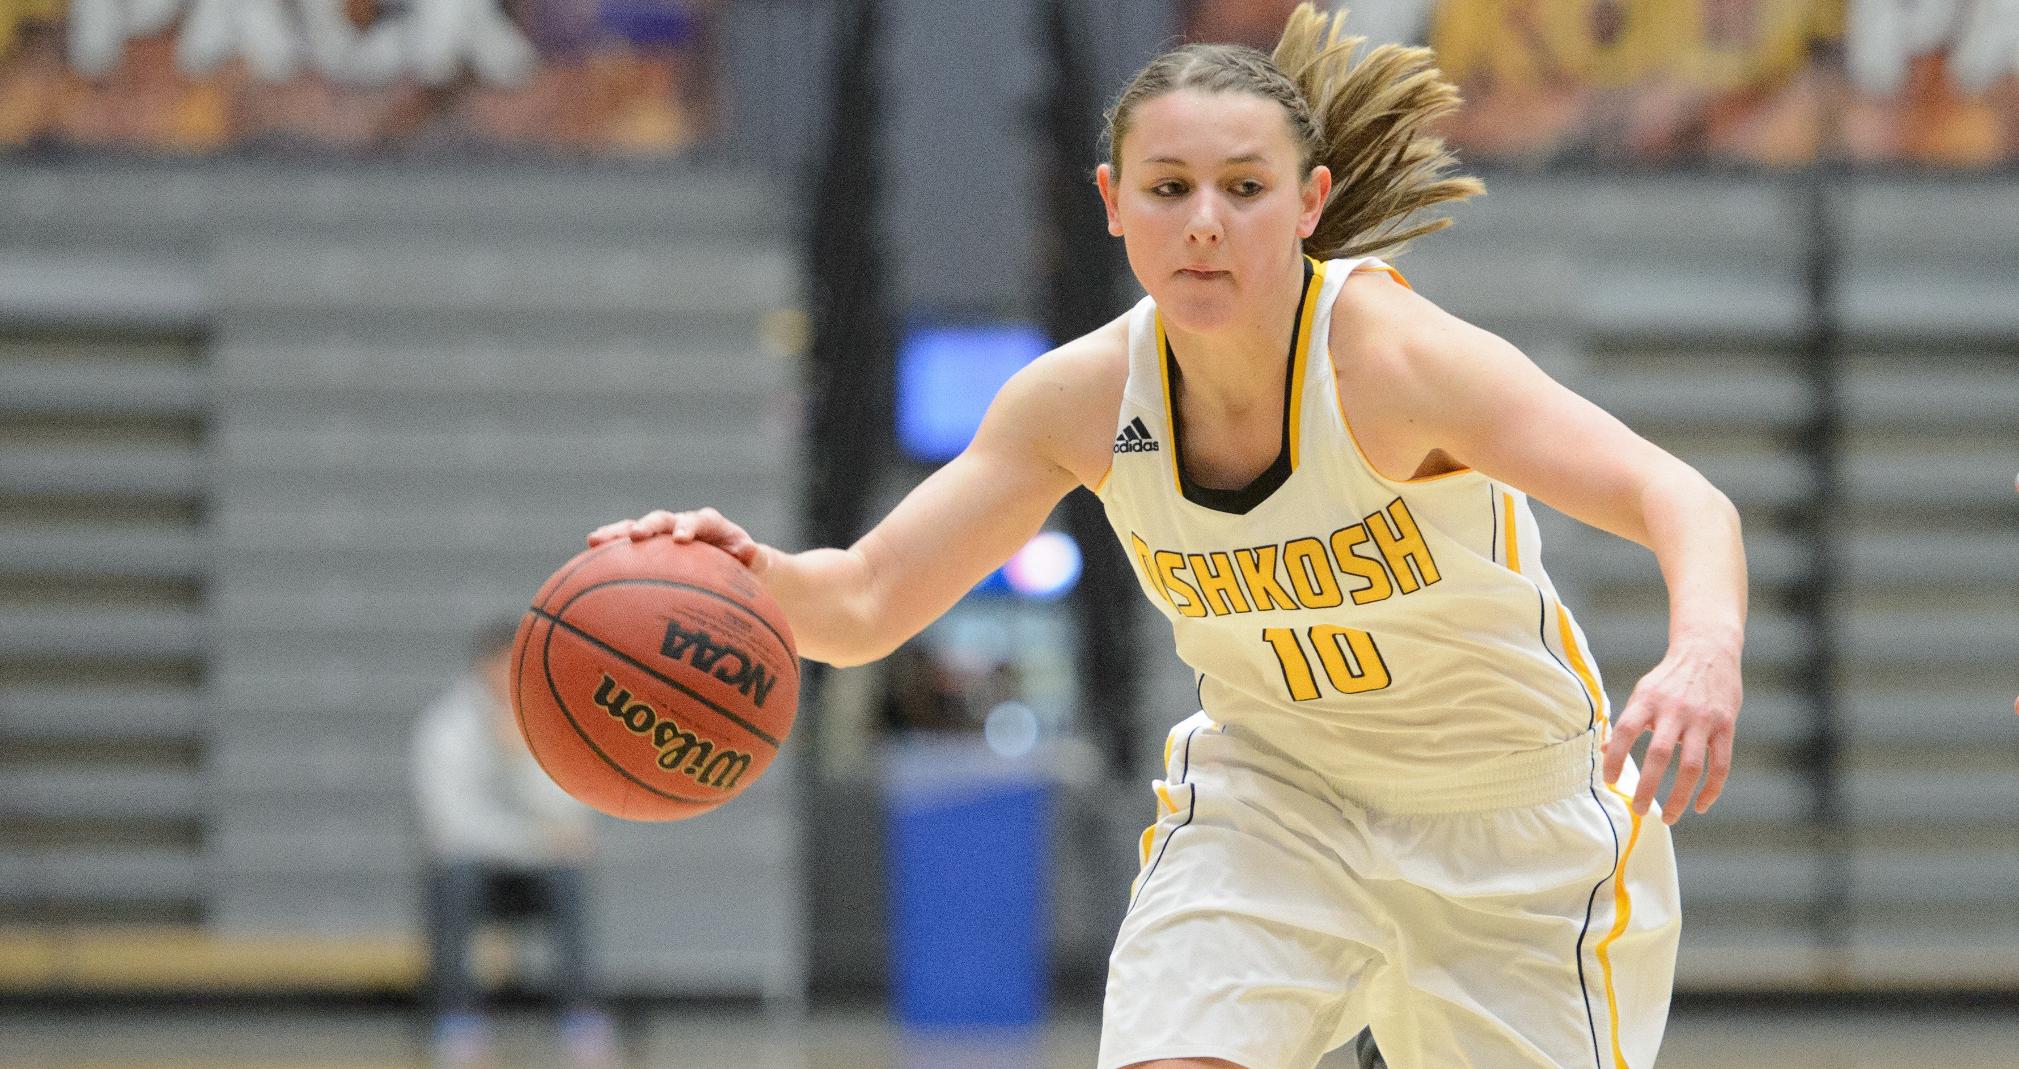 Taylor Schmidt led all players with her 21 points and five assists.